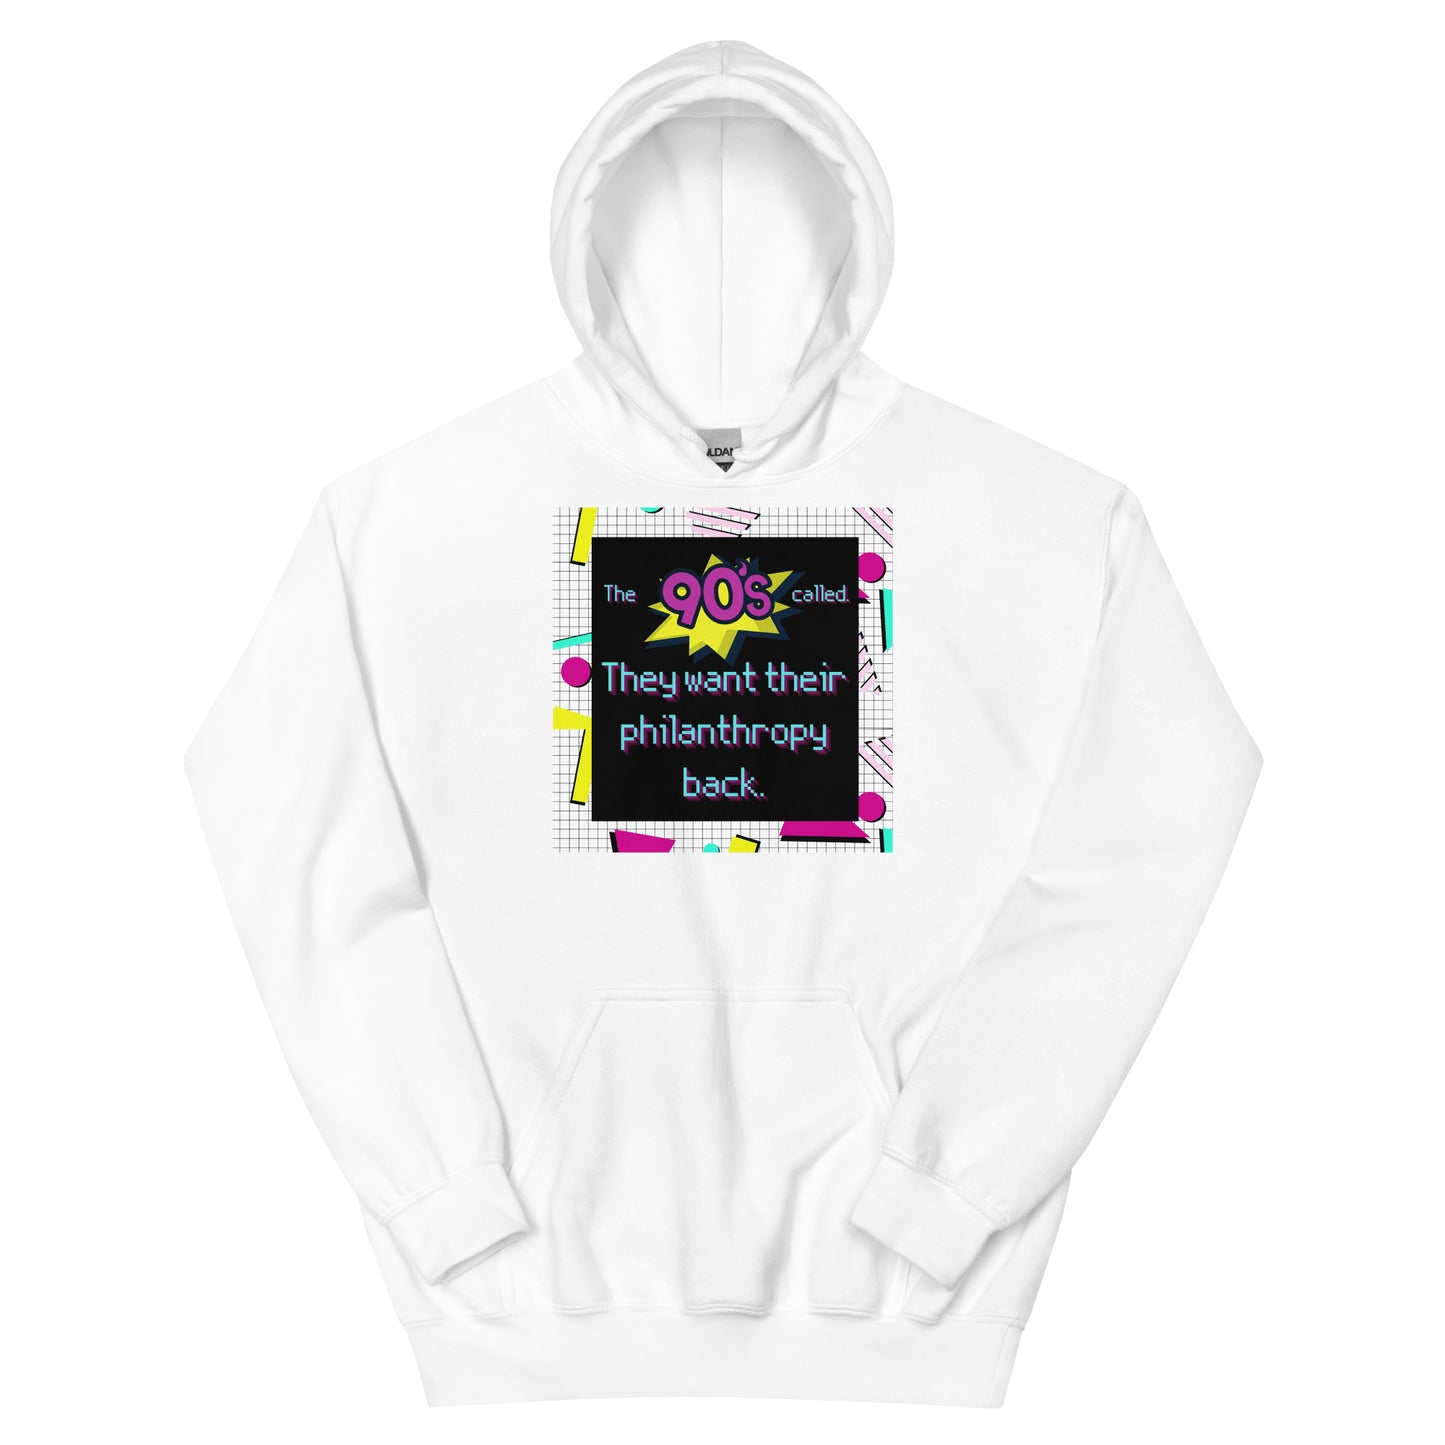 The 90's Wants Their Philanthropy Back Unisex Hoodie